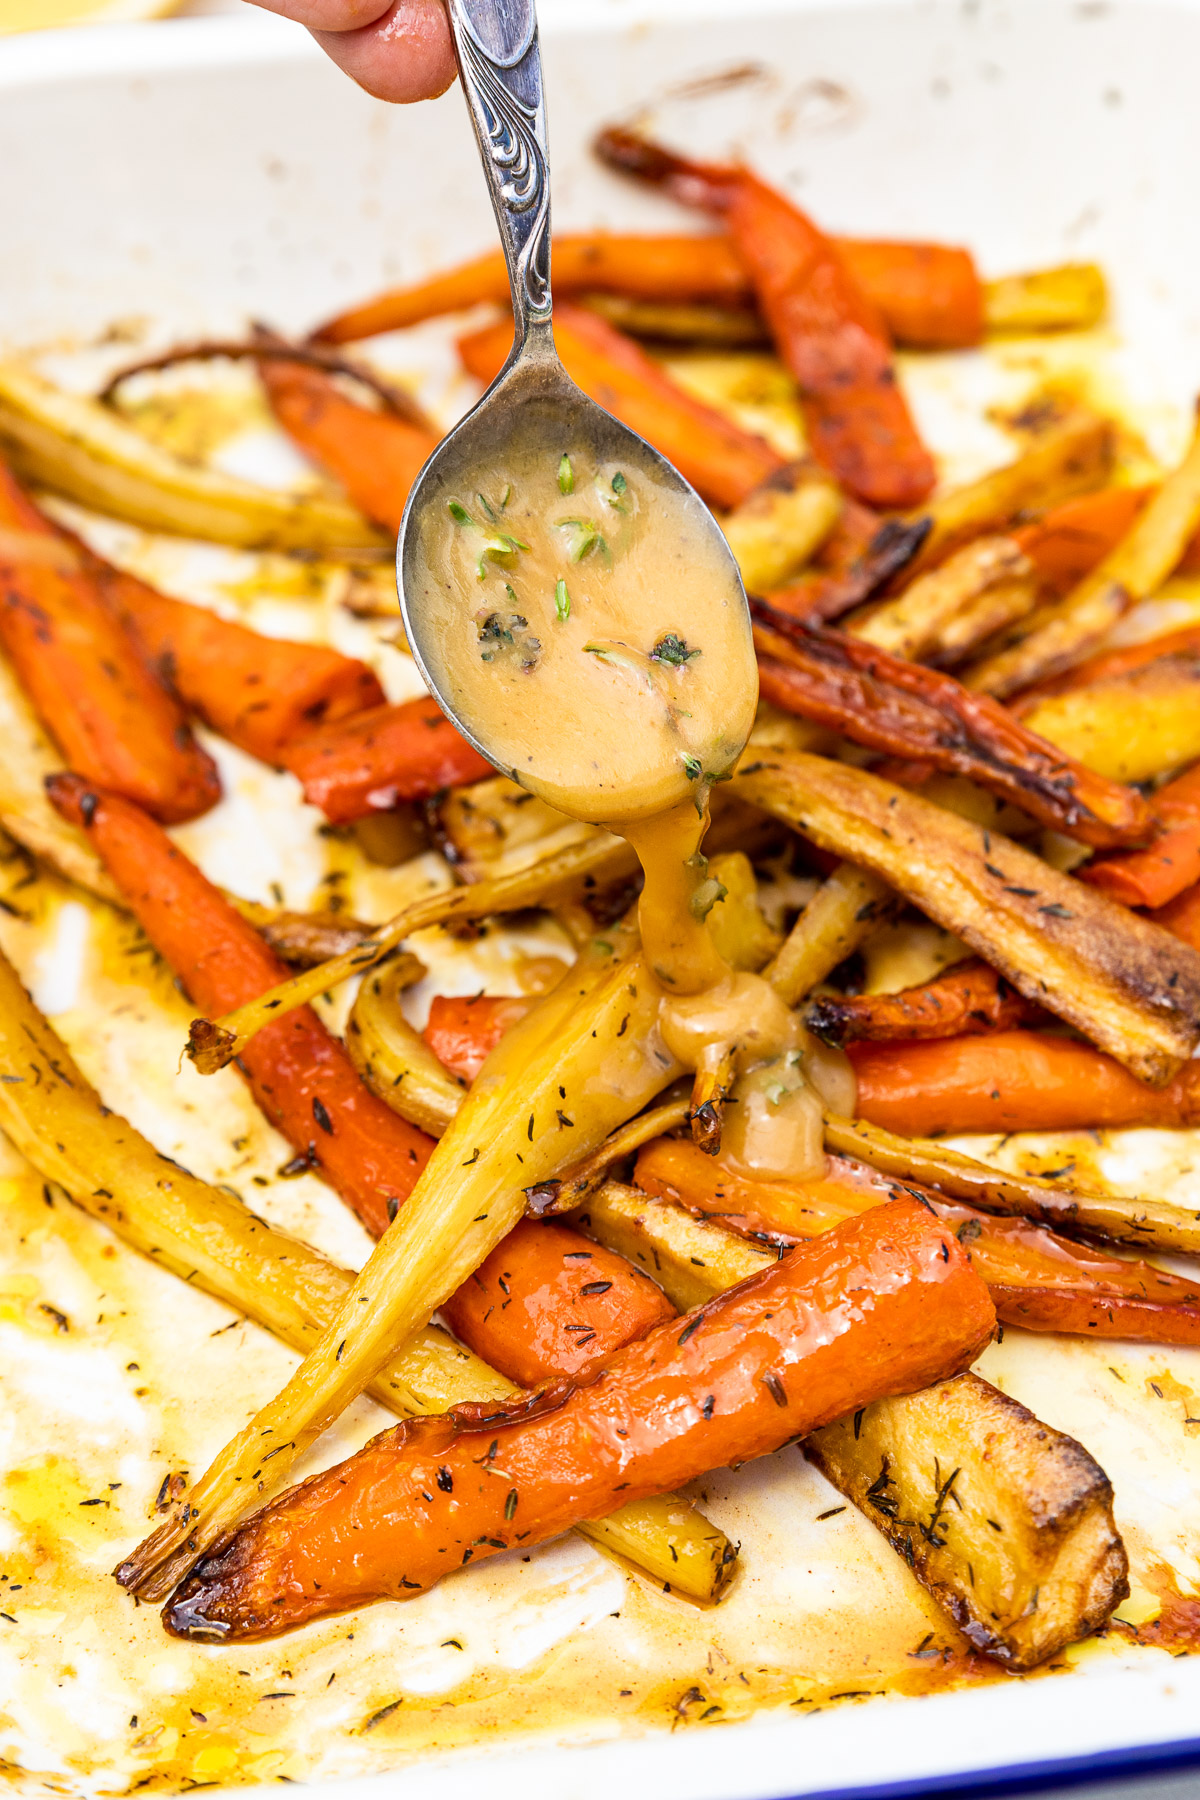 Closeup of a spoon drizzling thick lemon butter sauce with herbs over honey roast carrots and parsnips in a white baking dish with a blue rim.